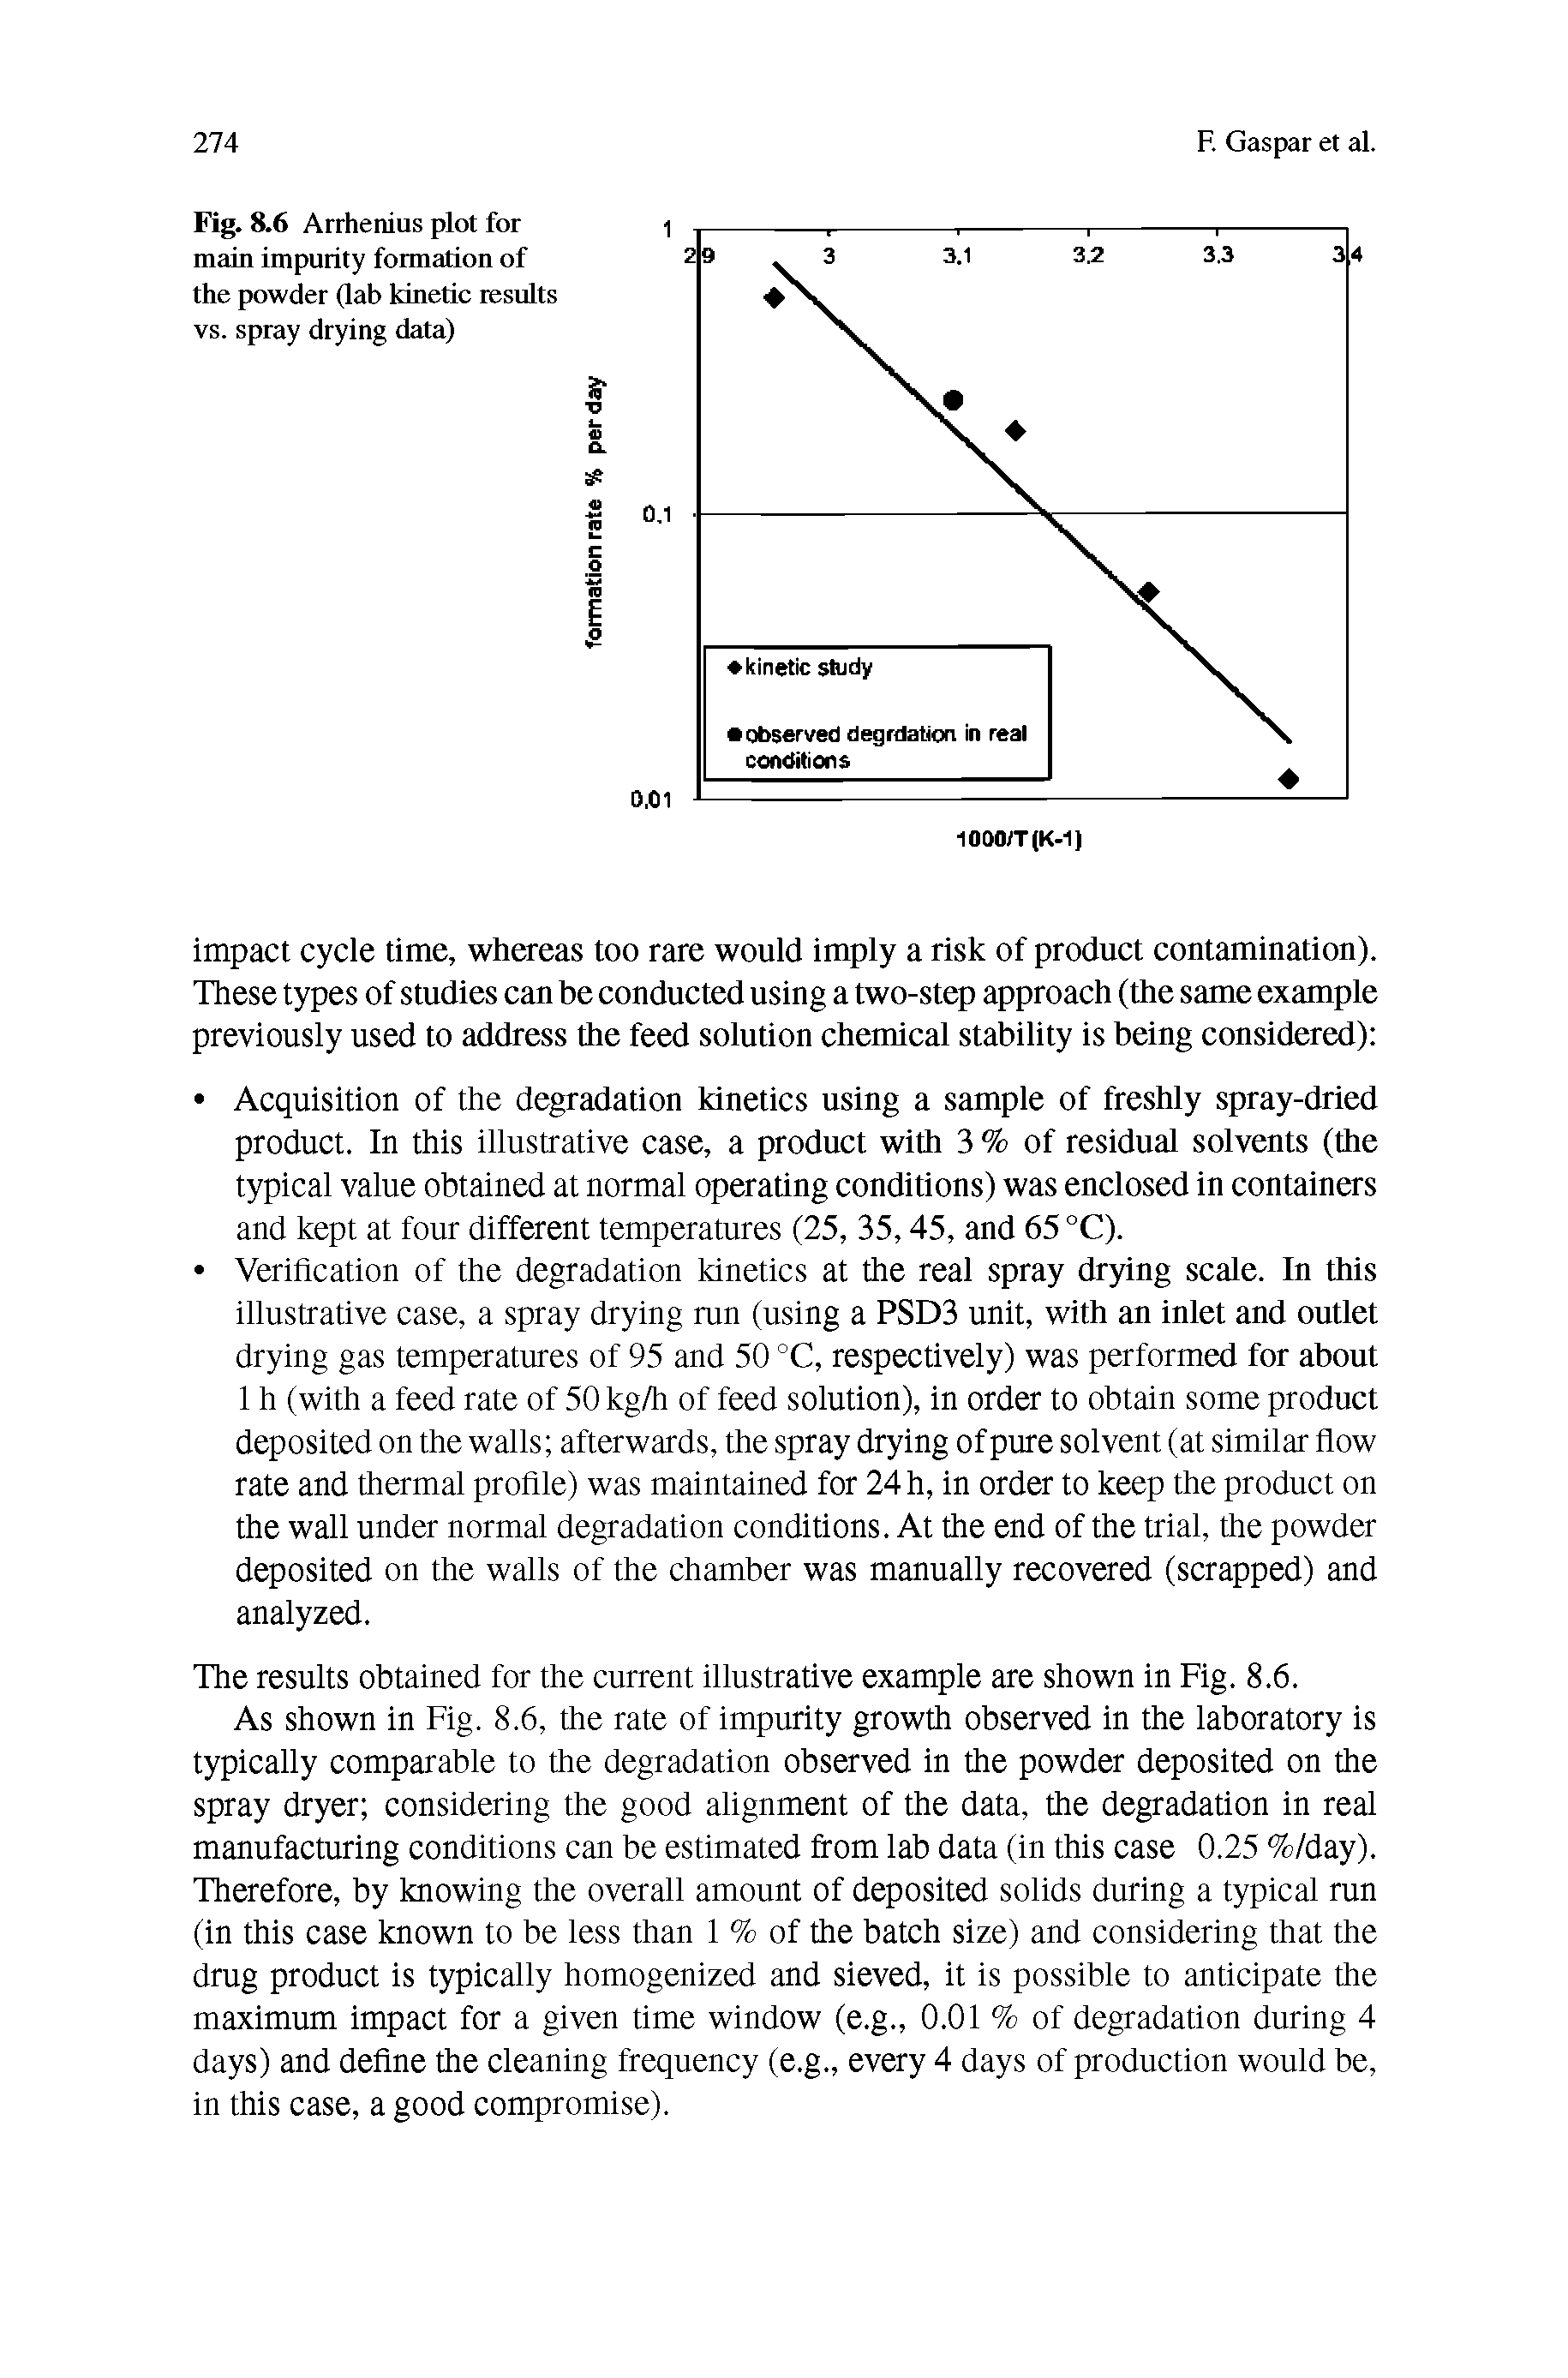 Fig. 8.6 Arrhenius plot for main impurity formation of the powder (lab kinetic results vs. spray drying data)...